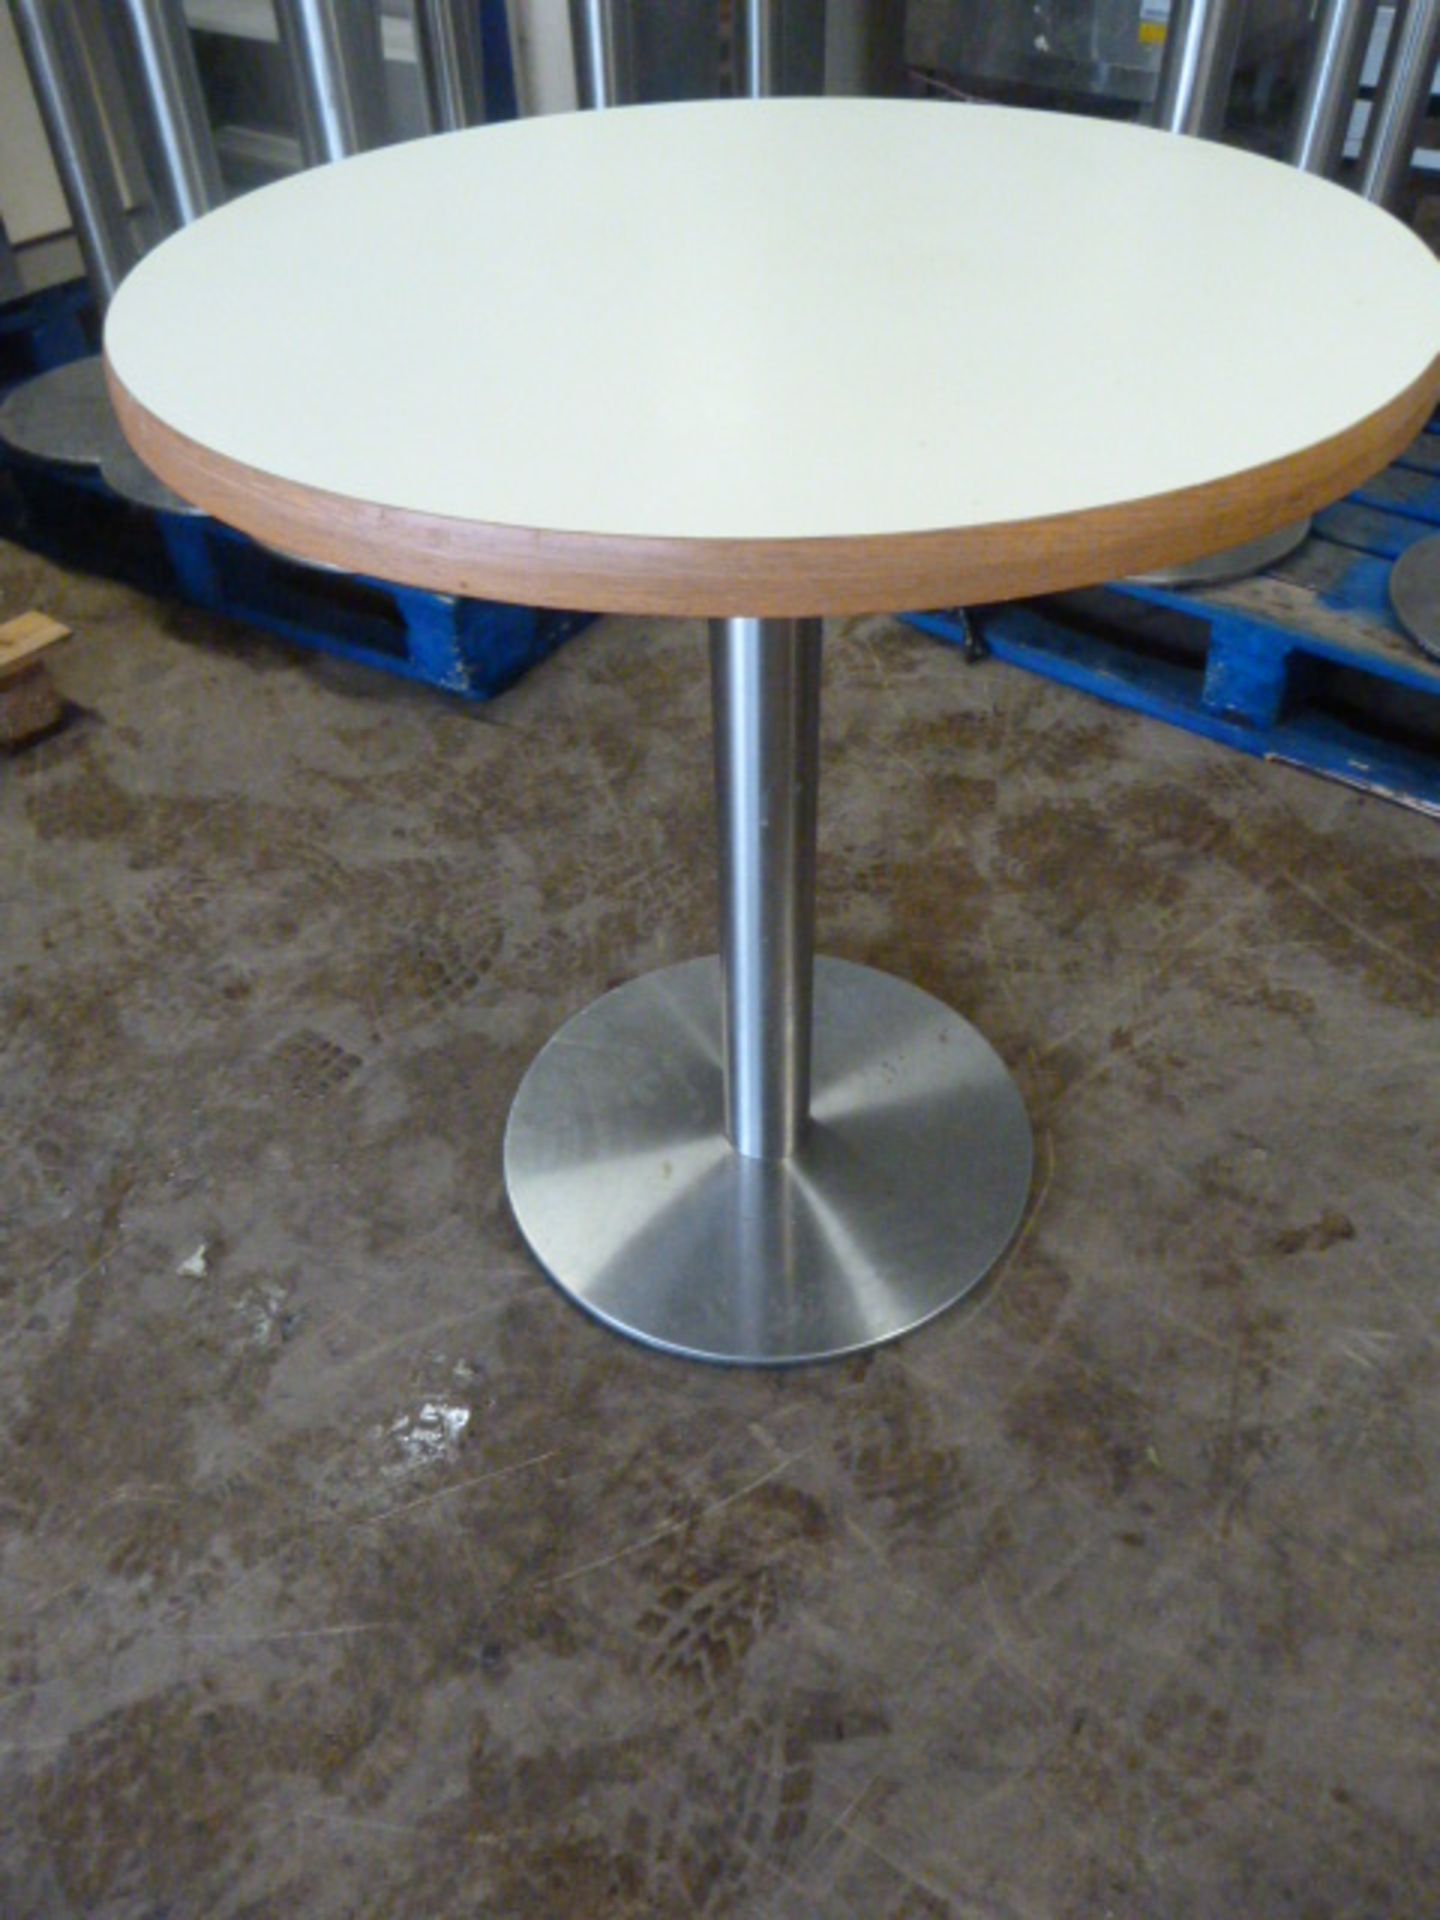 * Single Pedestal Wooden Topped Table 76cm tall, 75cm diameter (No fittings)